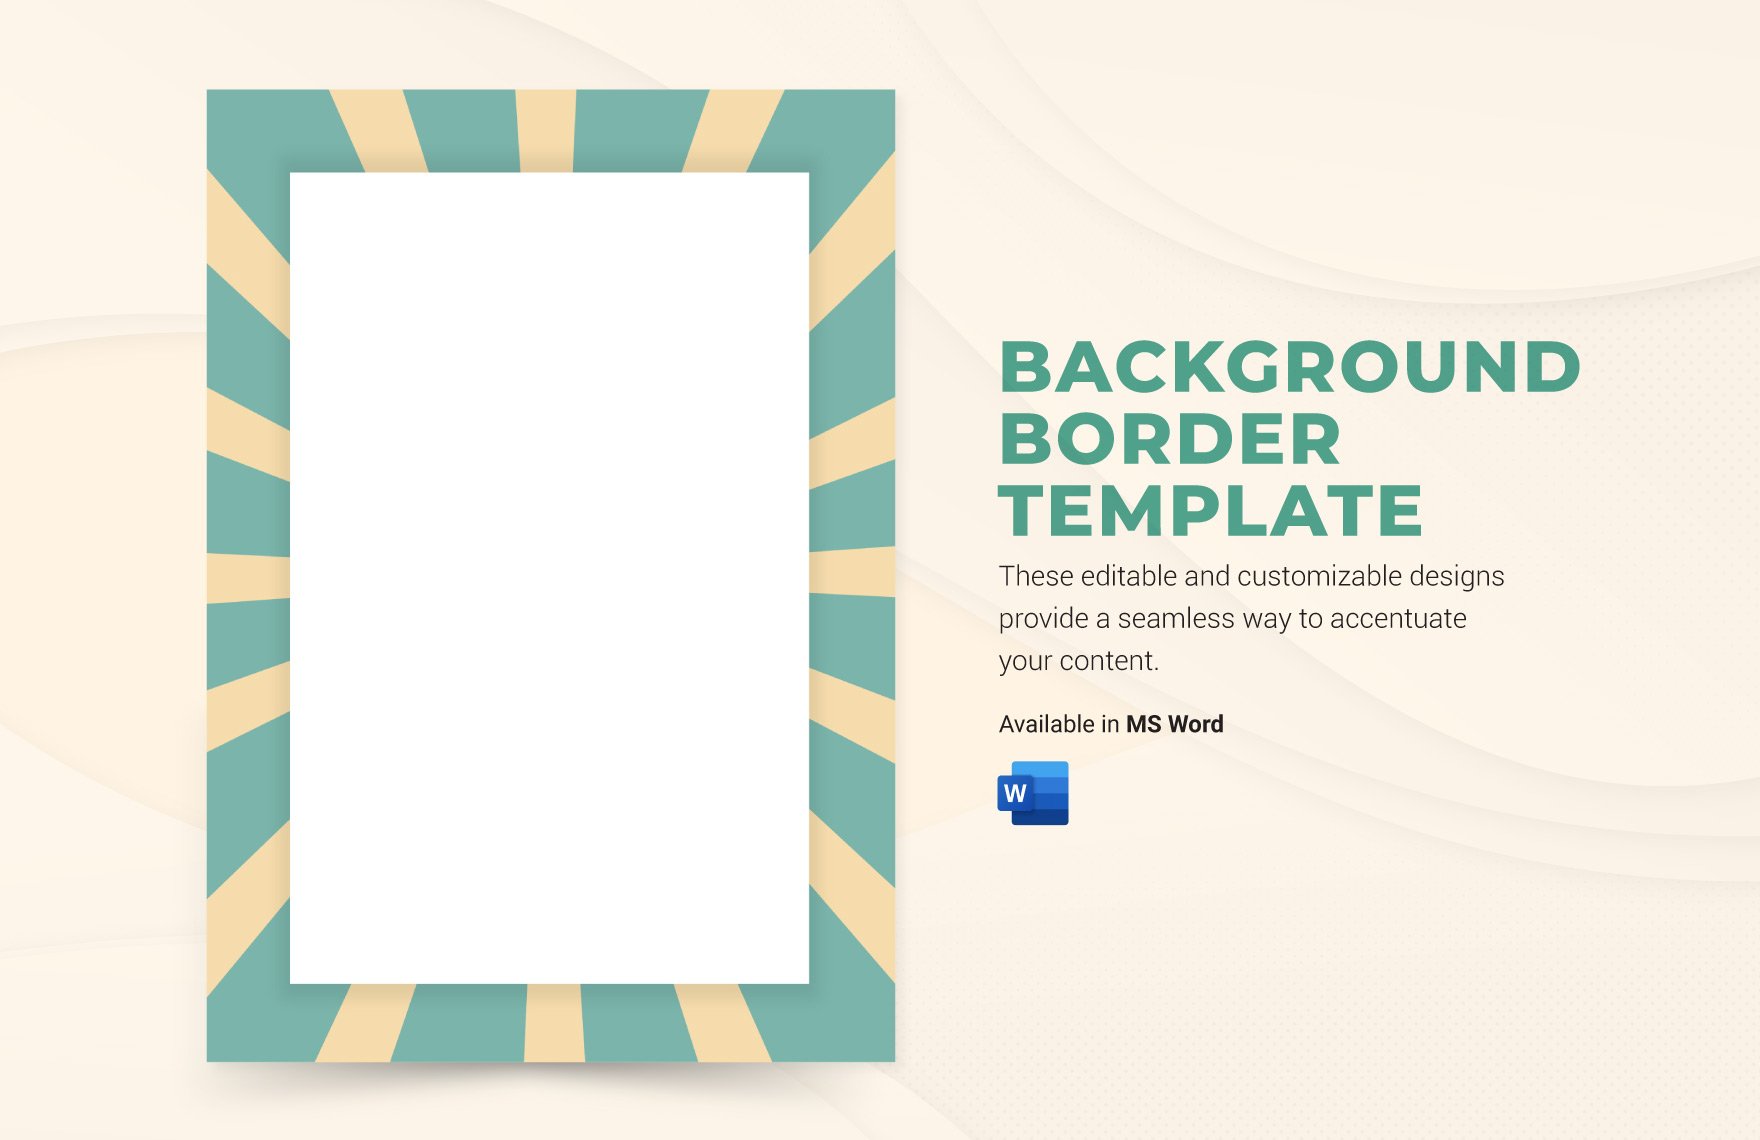 Background Border Template